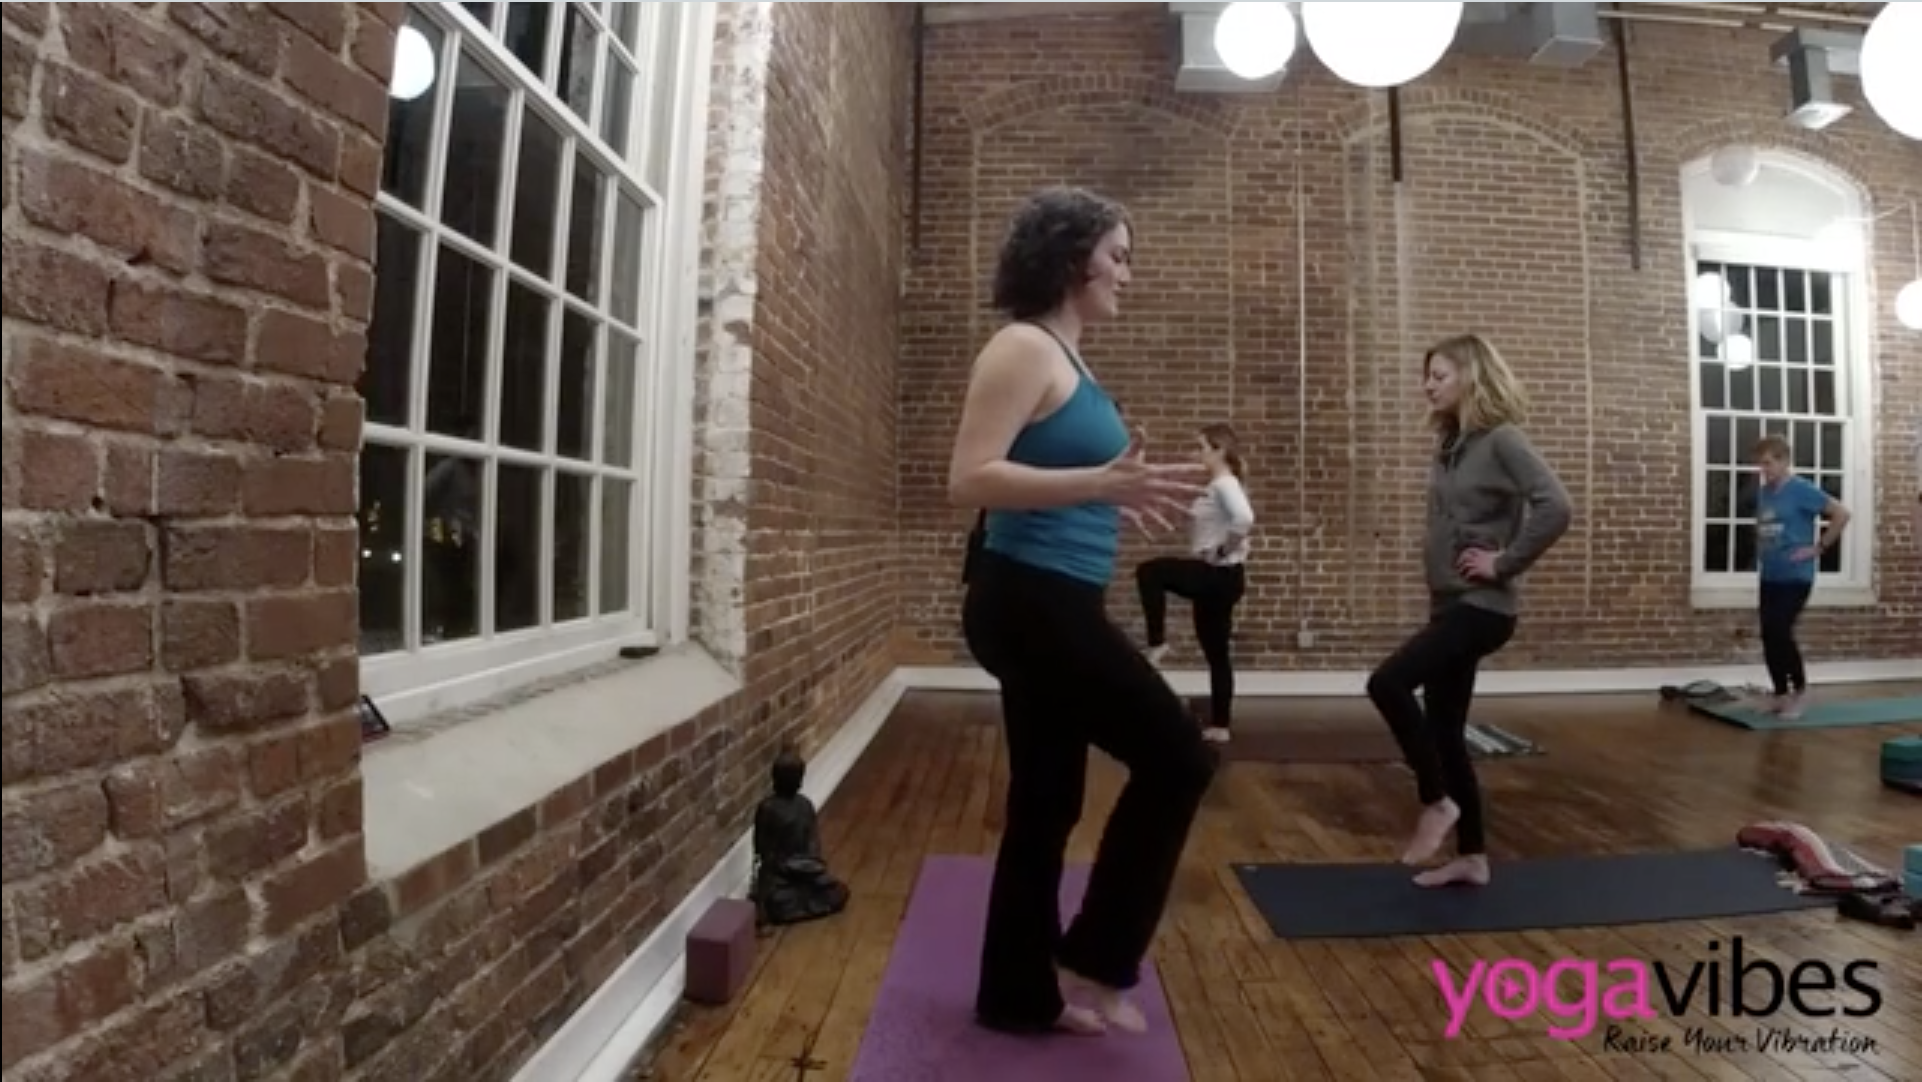 Watch: Yoga for Athletic Balance, with Wall Work